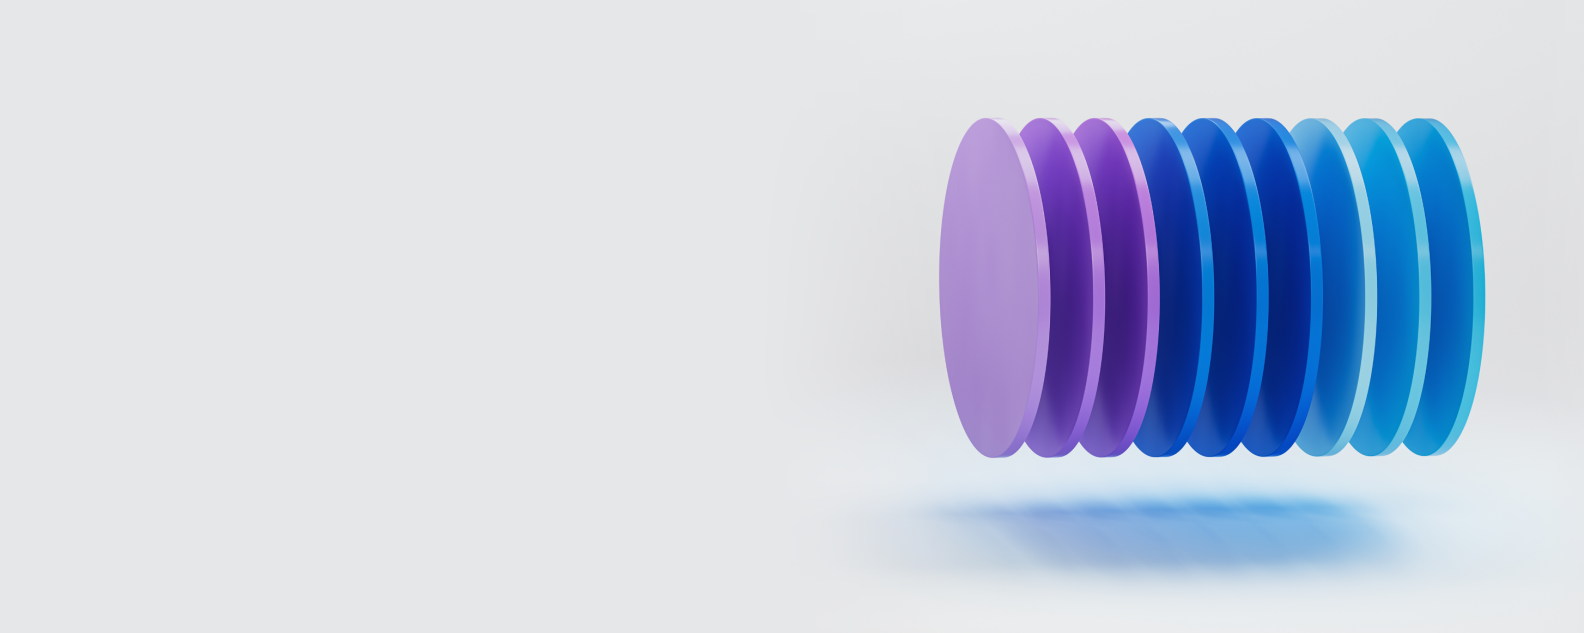 Illustration of purple, blue and light blue discs stacked vertically